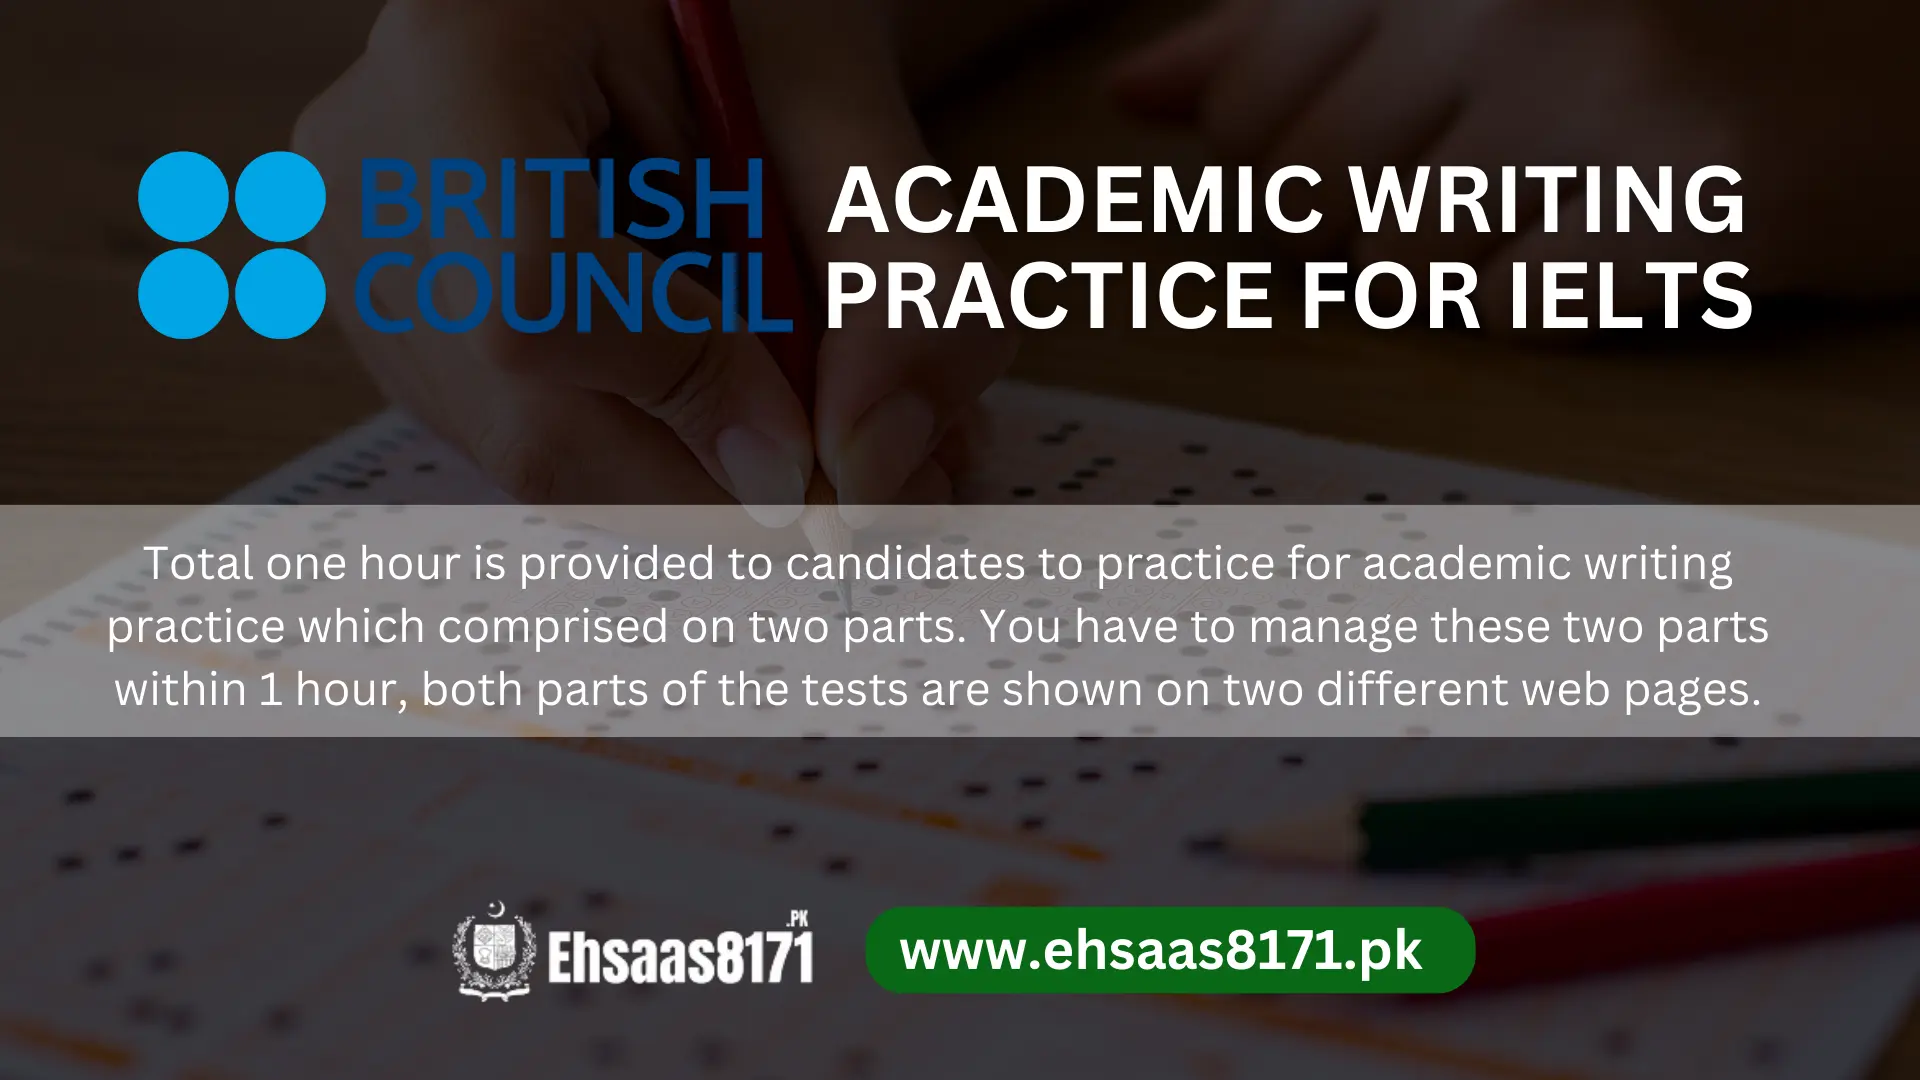 Academic writing practice for IELTS